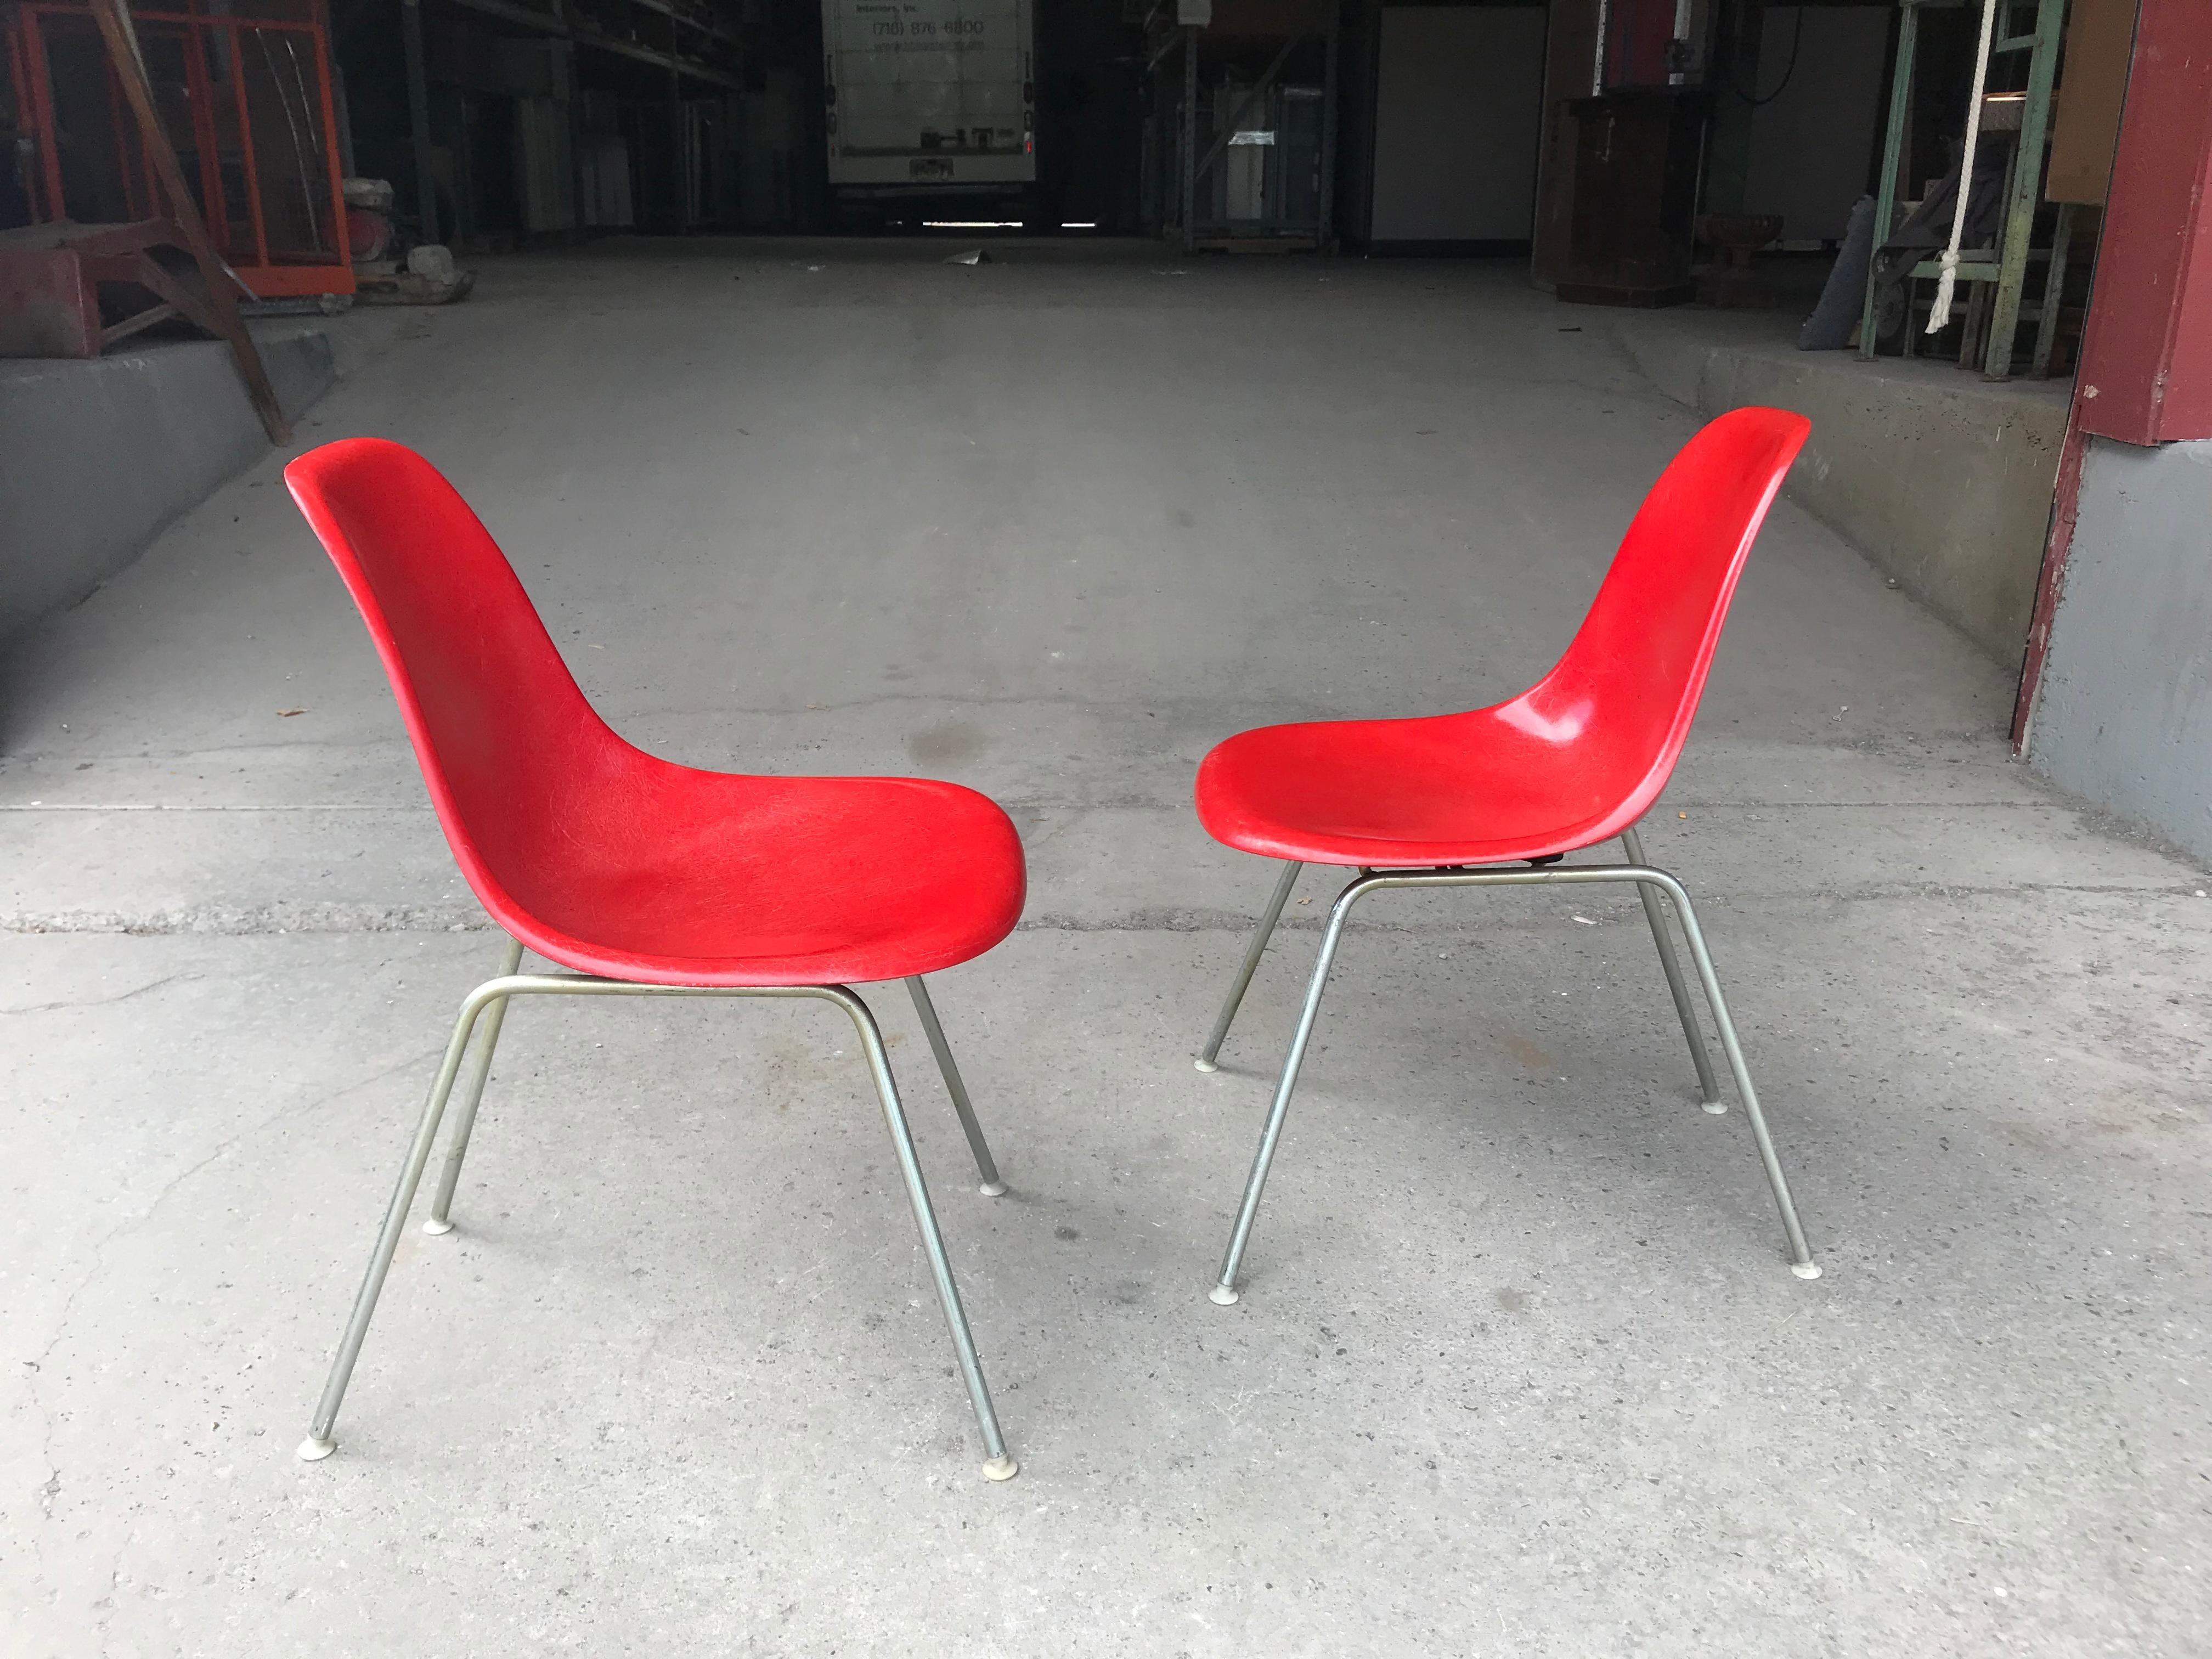 Classic Mid-Century Modern side shell chairs, 